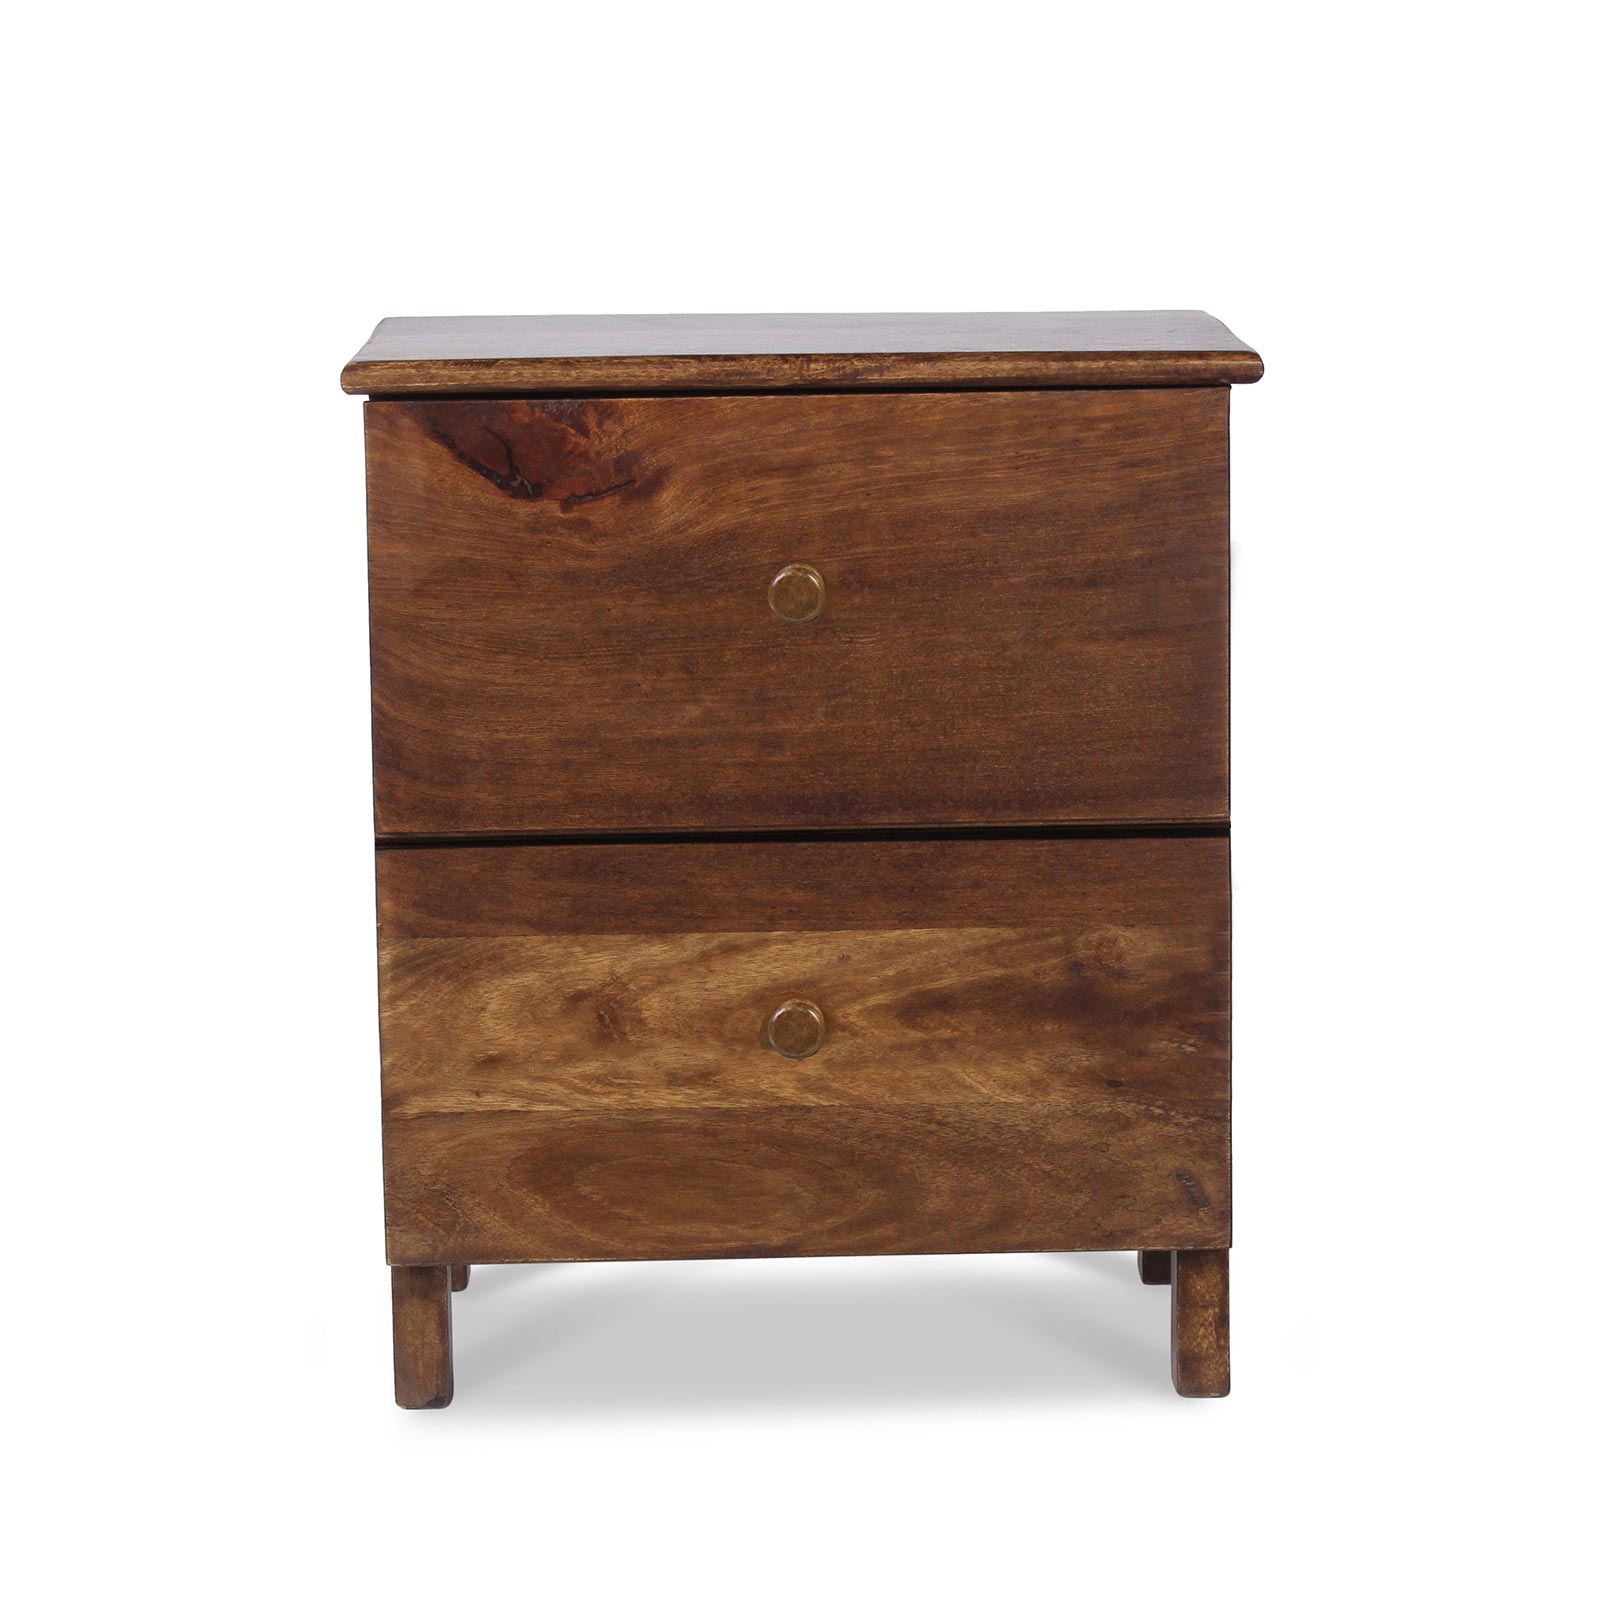 Buy Reina Solid Wood Bedside Tables with Drawers